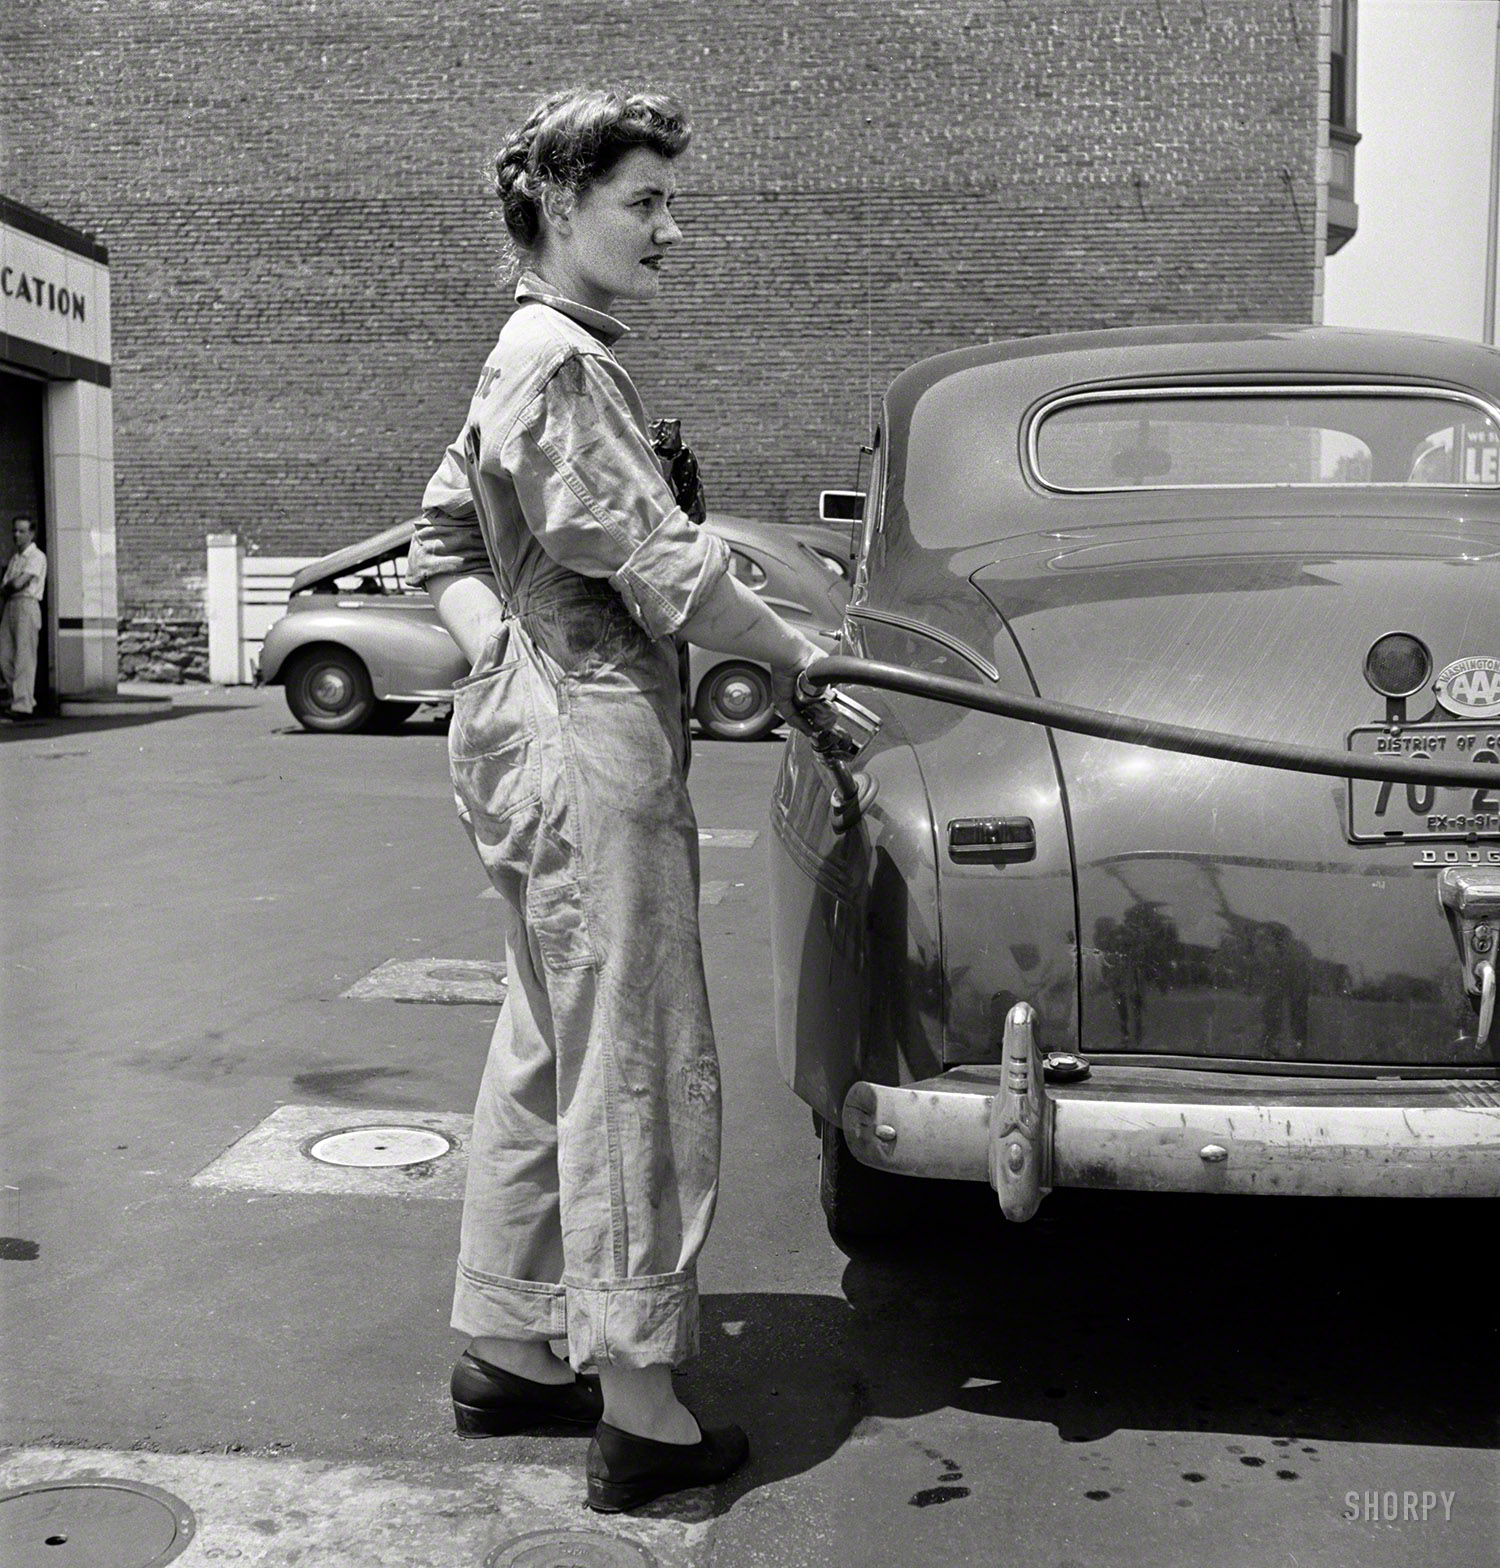 June 1943. "Miss Frances Heisler, pump attendant at one of the Atlantic Refining Company garages in Philadelphia. She was formerly a clerk in the payroll department of the Curtis Publishing Co." Our third look at Frances on the job. Photo by Jack Delano for the Office of War Information. View full size.